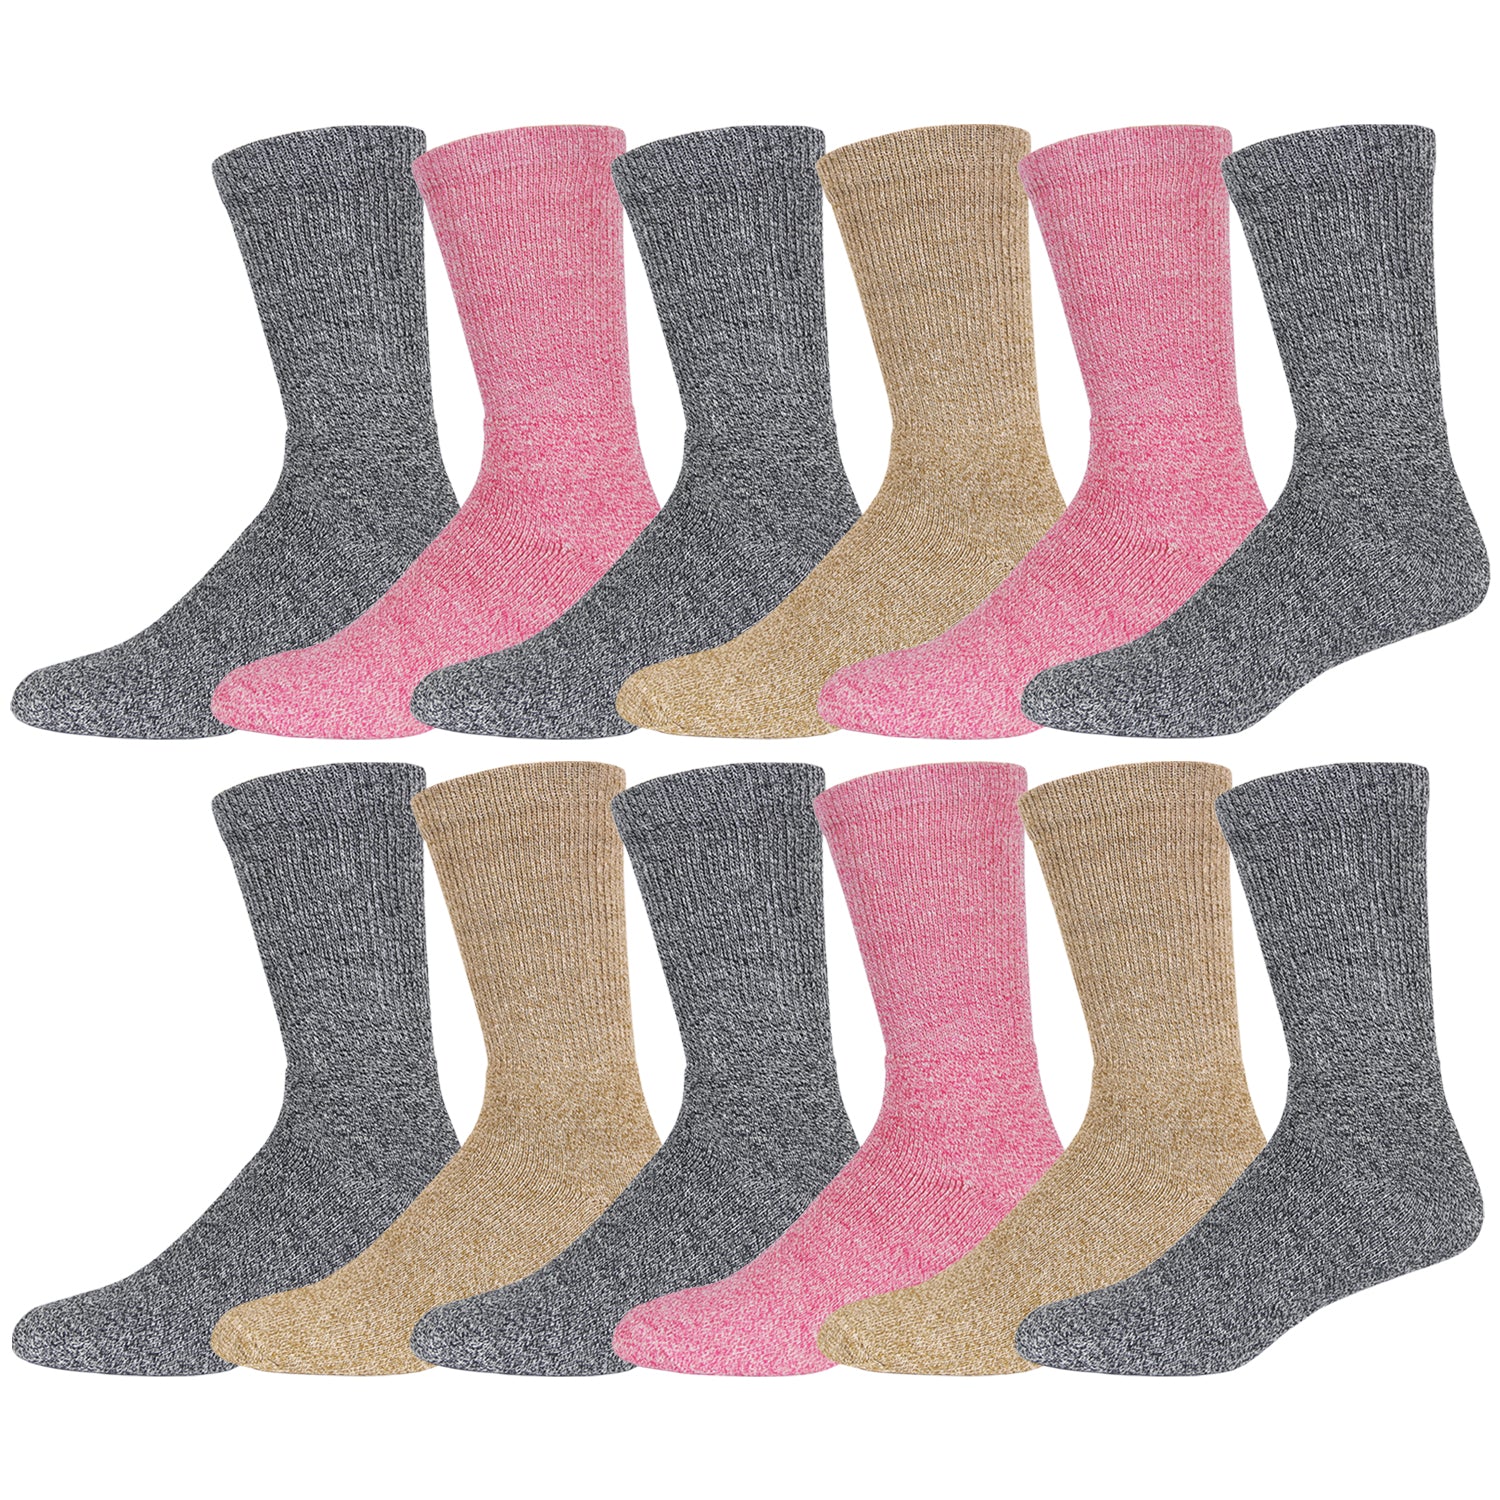 Merino Wool Socks, Warm Crew Thermal Socks For Winter, Men's and Women's Extreme Cold Weather Socks, Light Assorted Colors, Size 10-13